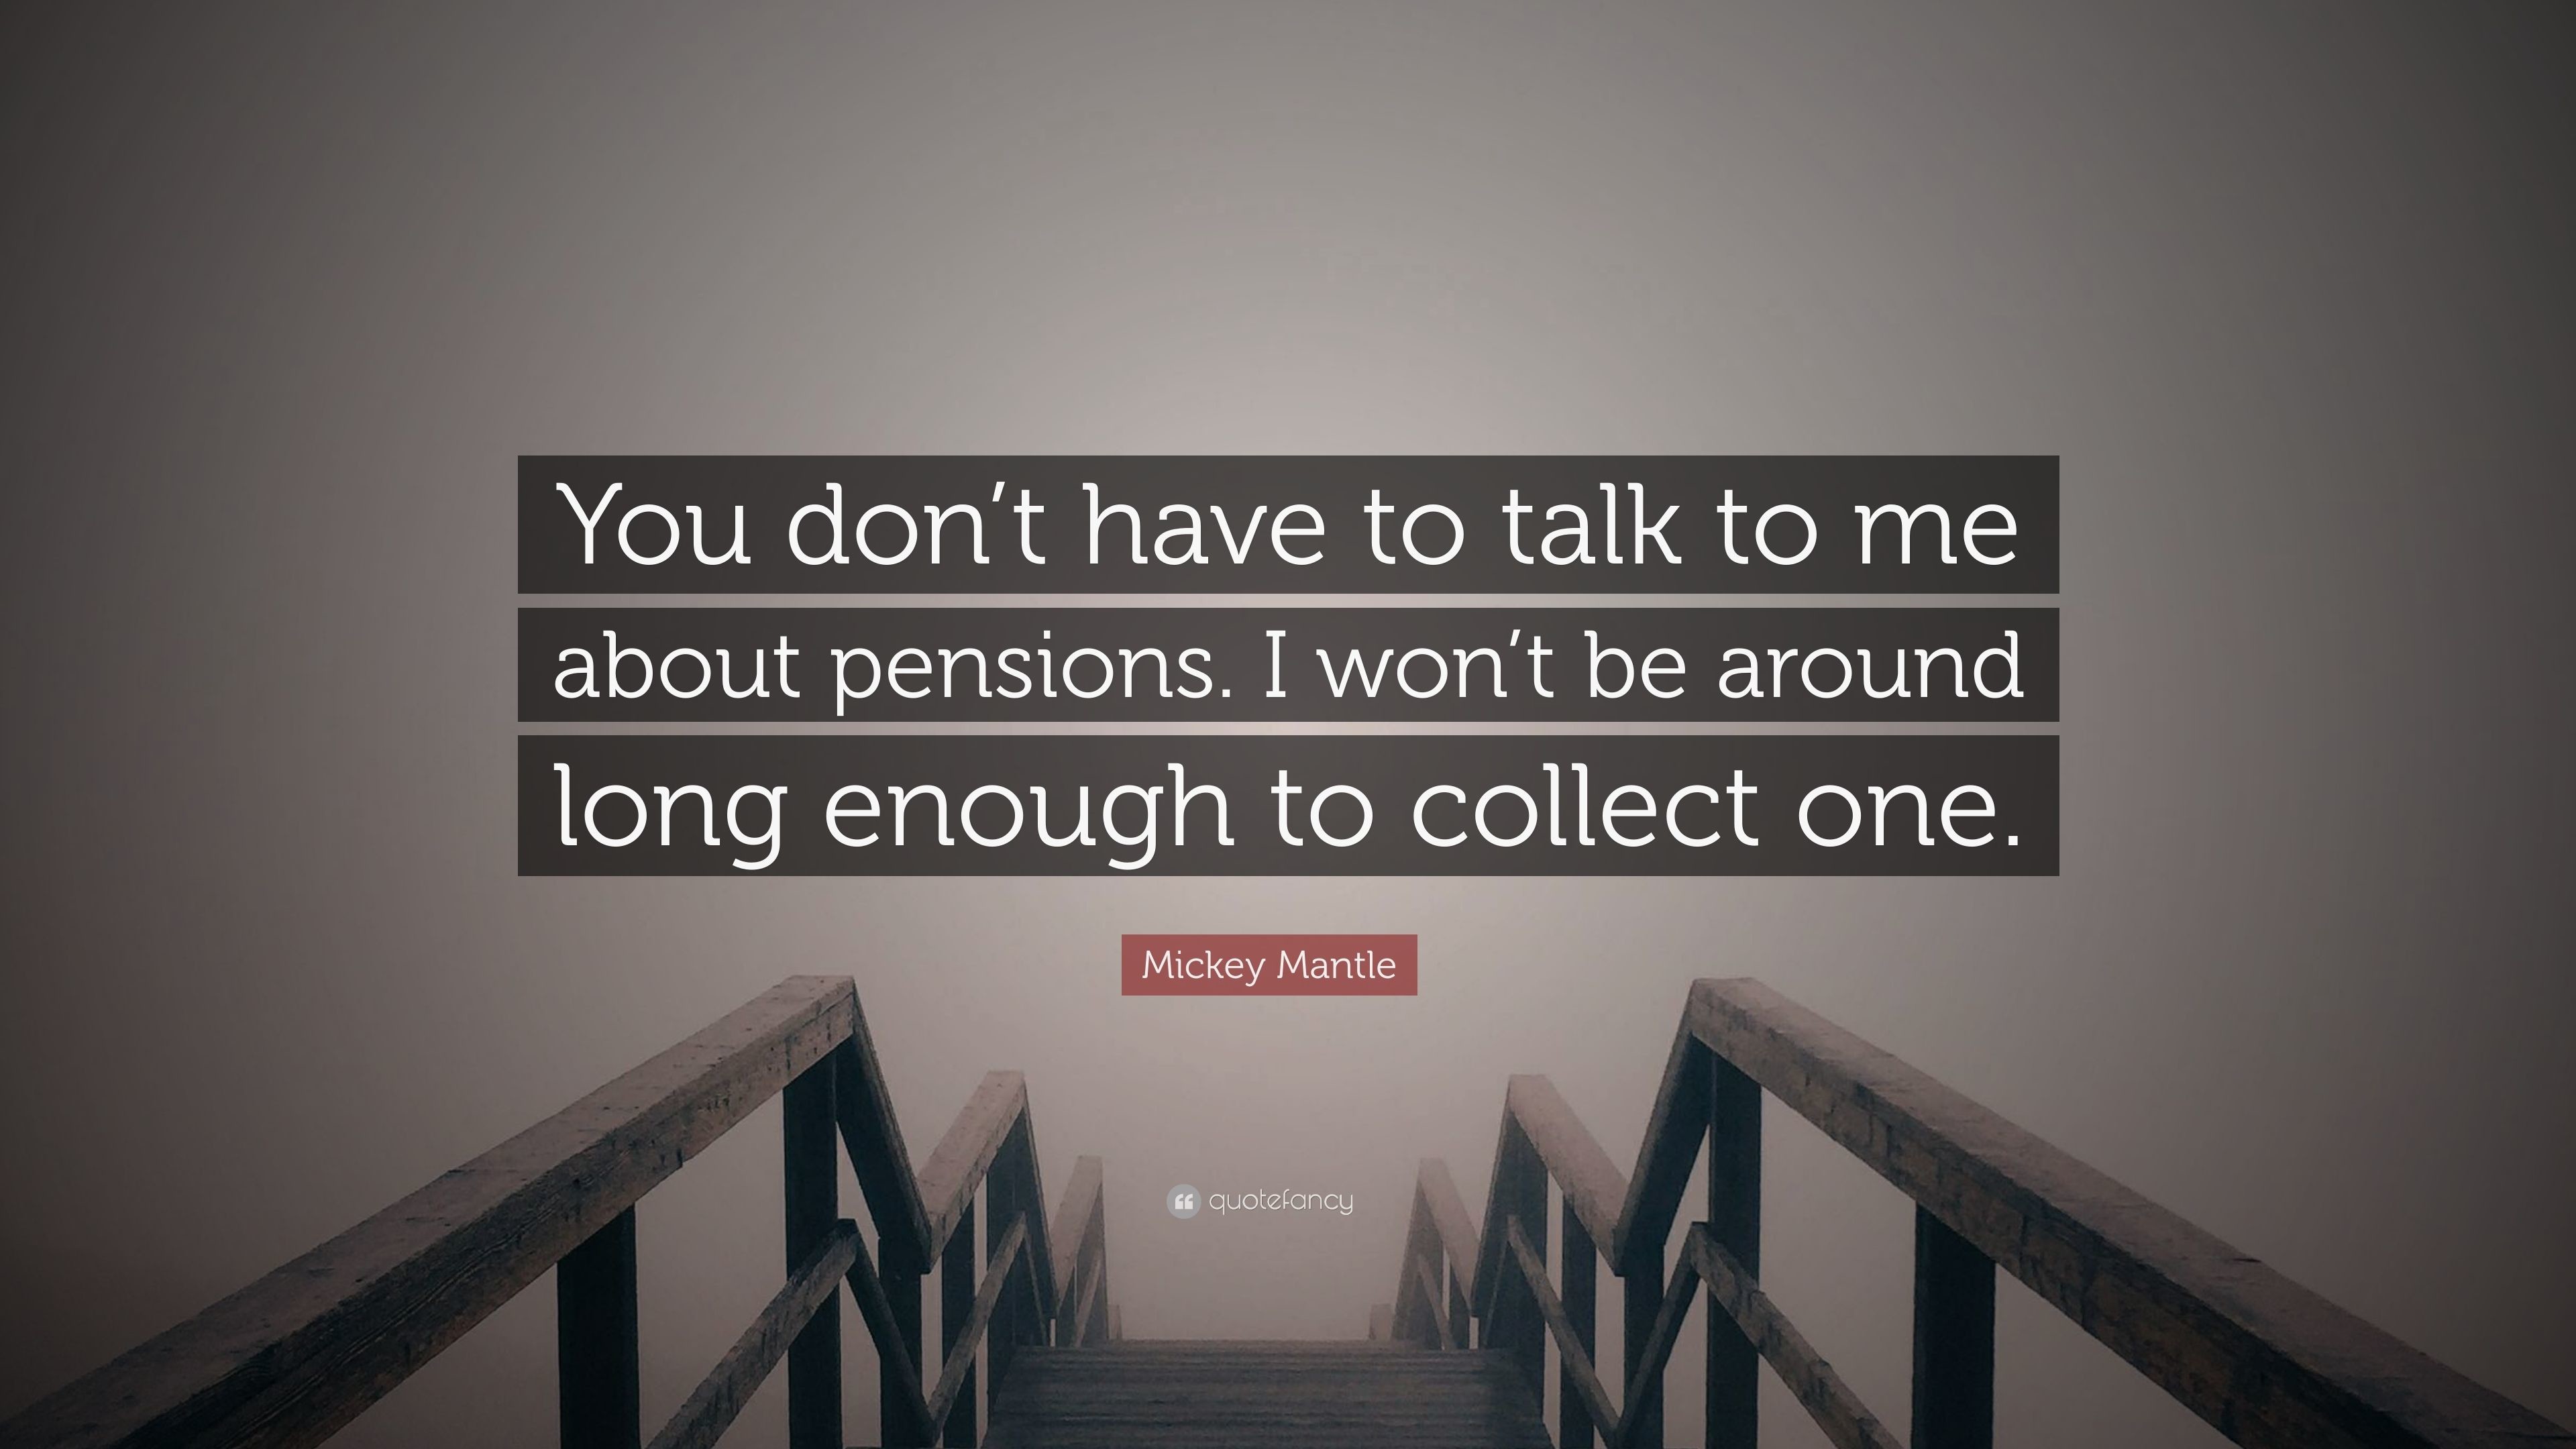 3840x2160 Mickey Mantle Quote: “You don't have to talk to me about pensions